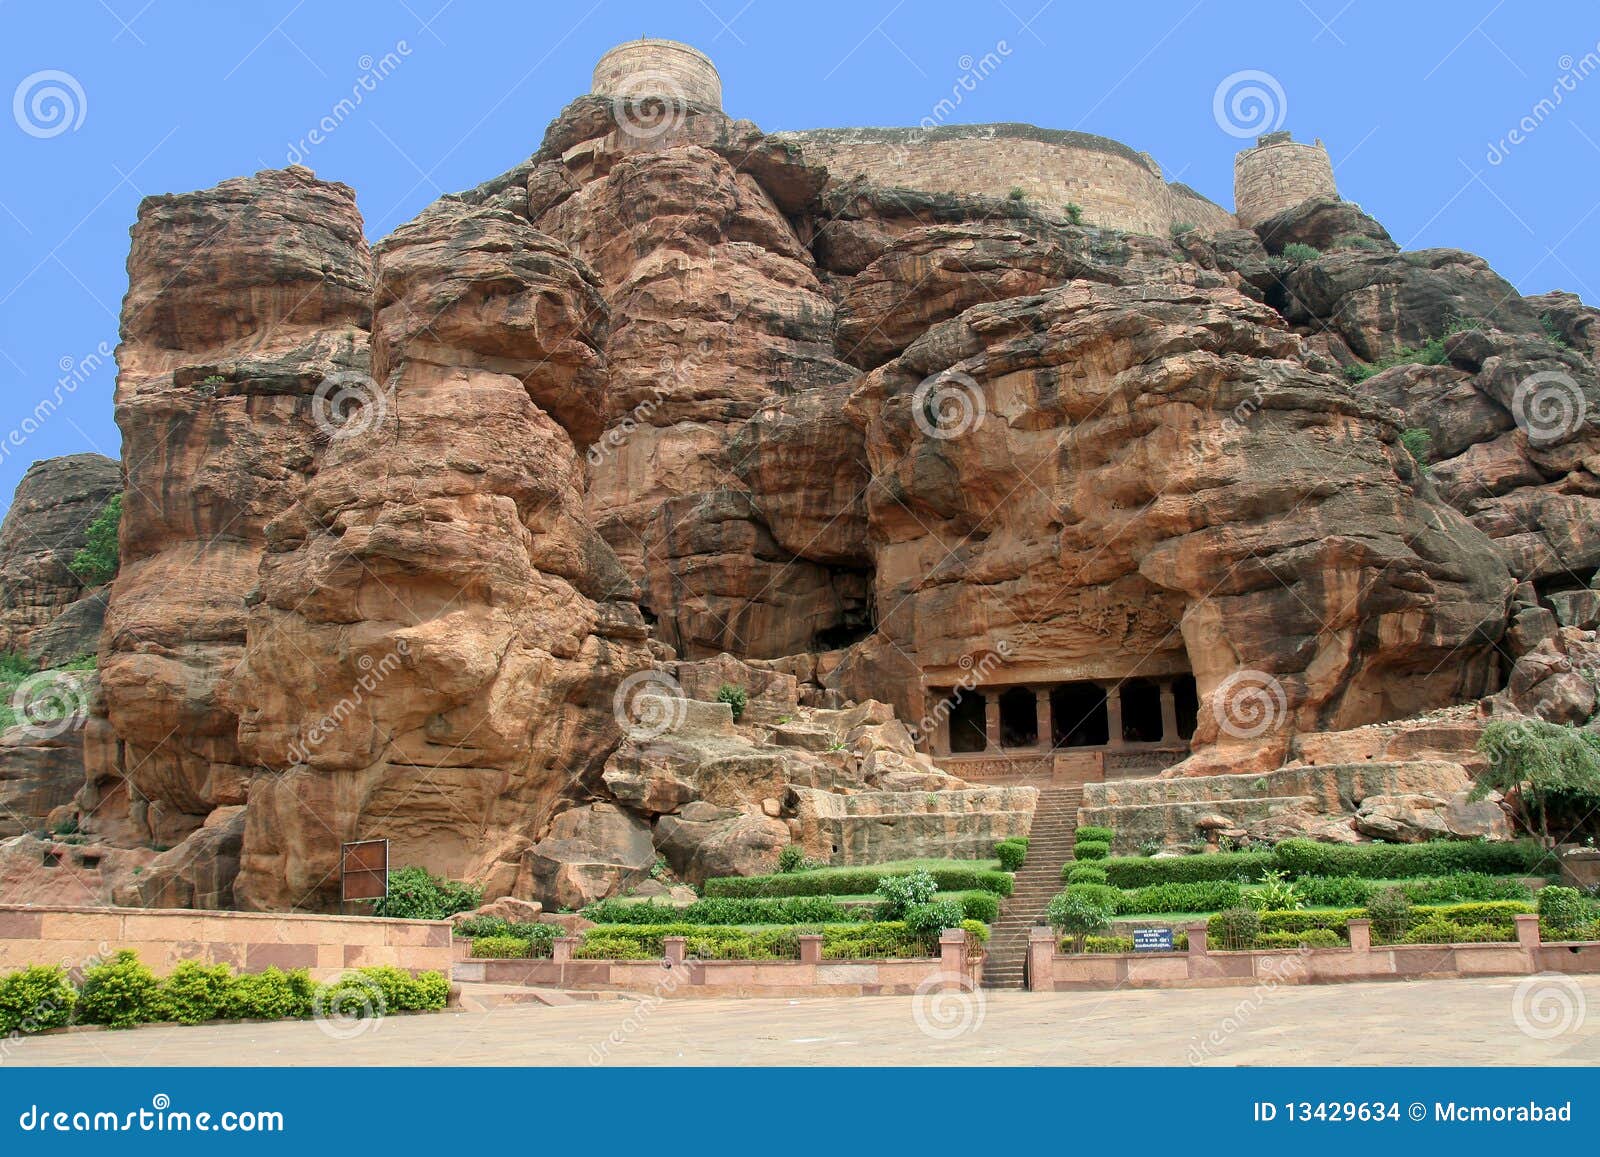 Mountain, Fort and Cave. Fort atop rocky mountain and first cave temple at Badami, Karnataka, India, Asia